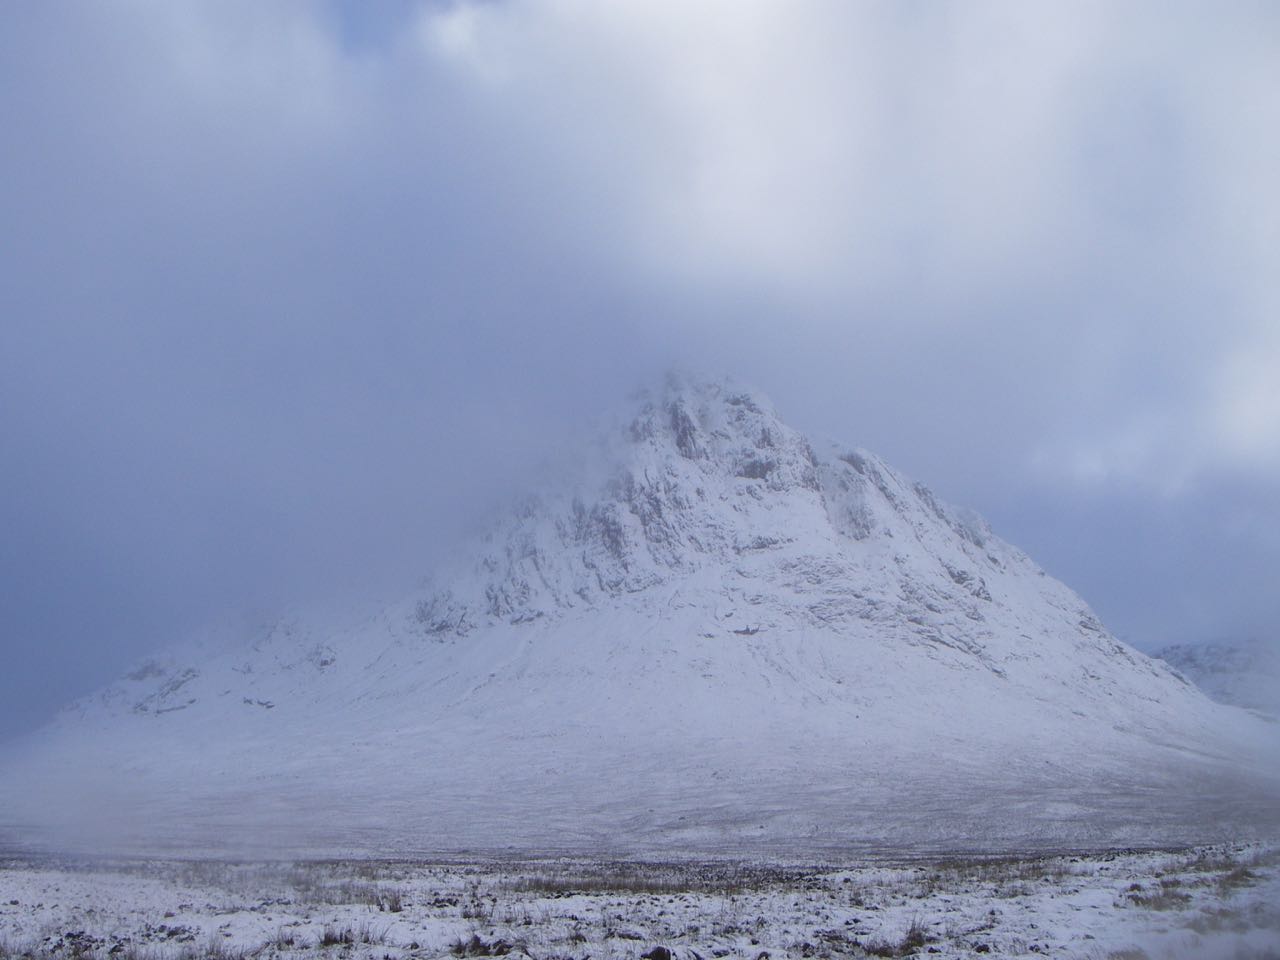 The Buachaille looking magical in a sea of pearly mist